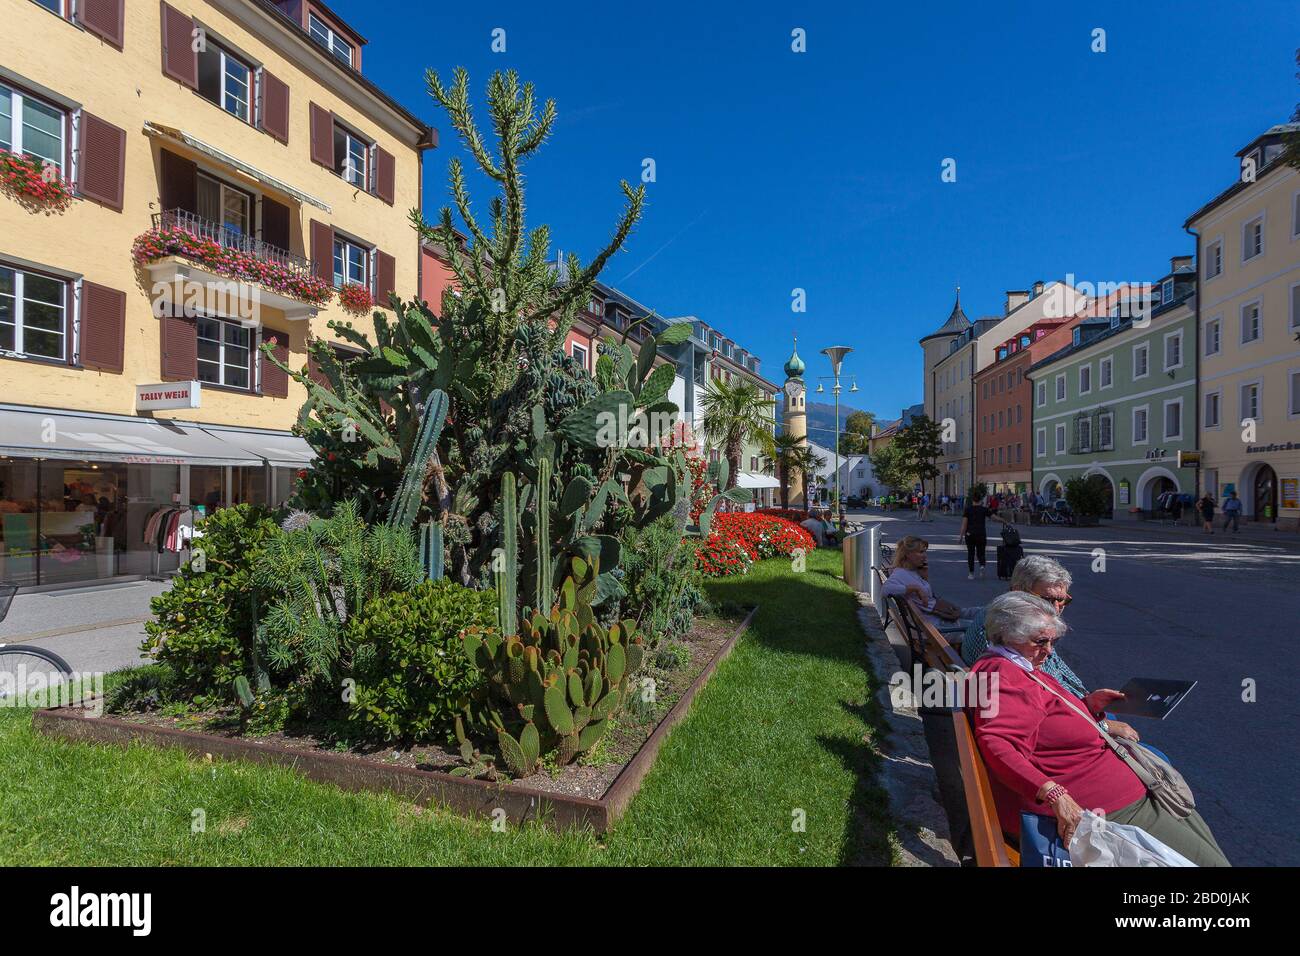 Cactus plants in the central square of Lienz Stock Photo